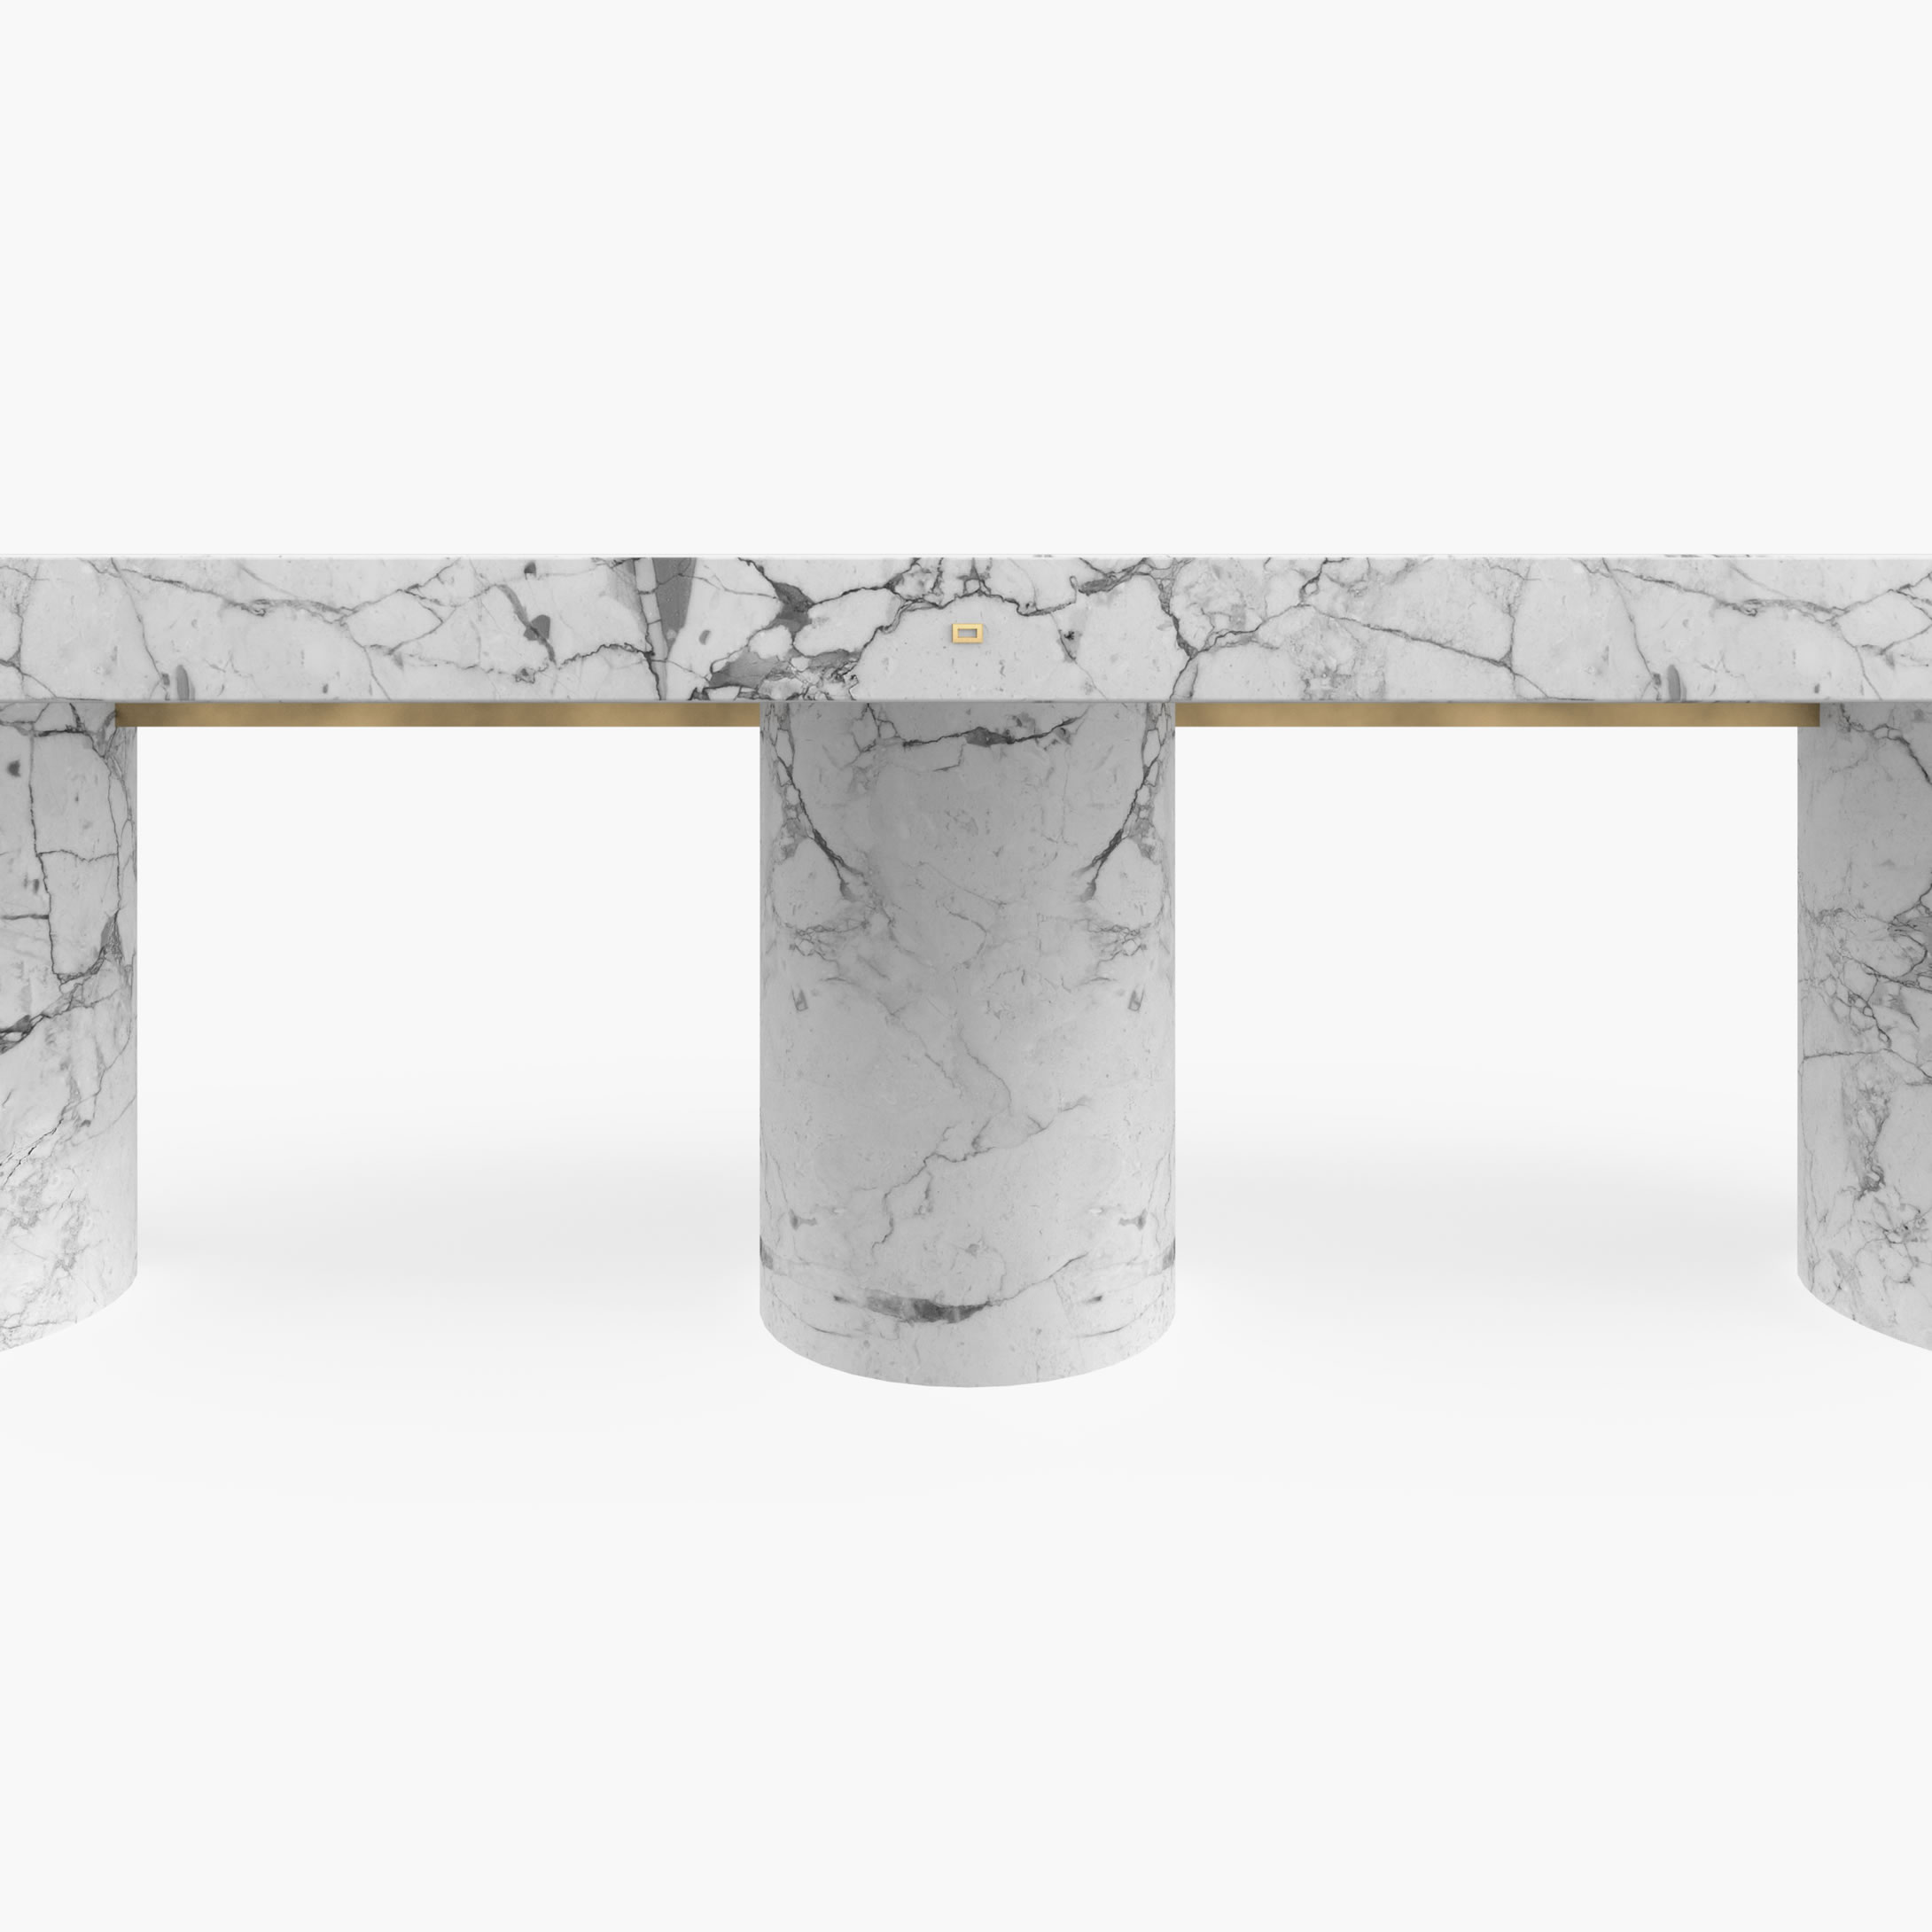 Dining Table large Cylinder legs White Arabescato Marble minimalistic Dining Room interior design Dining Tables FS 179 FELIX SCHWAKE